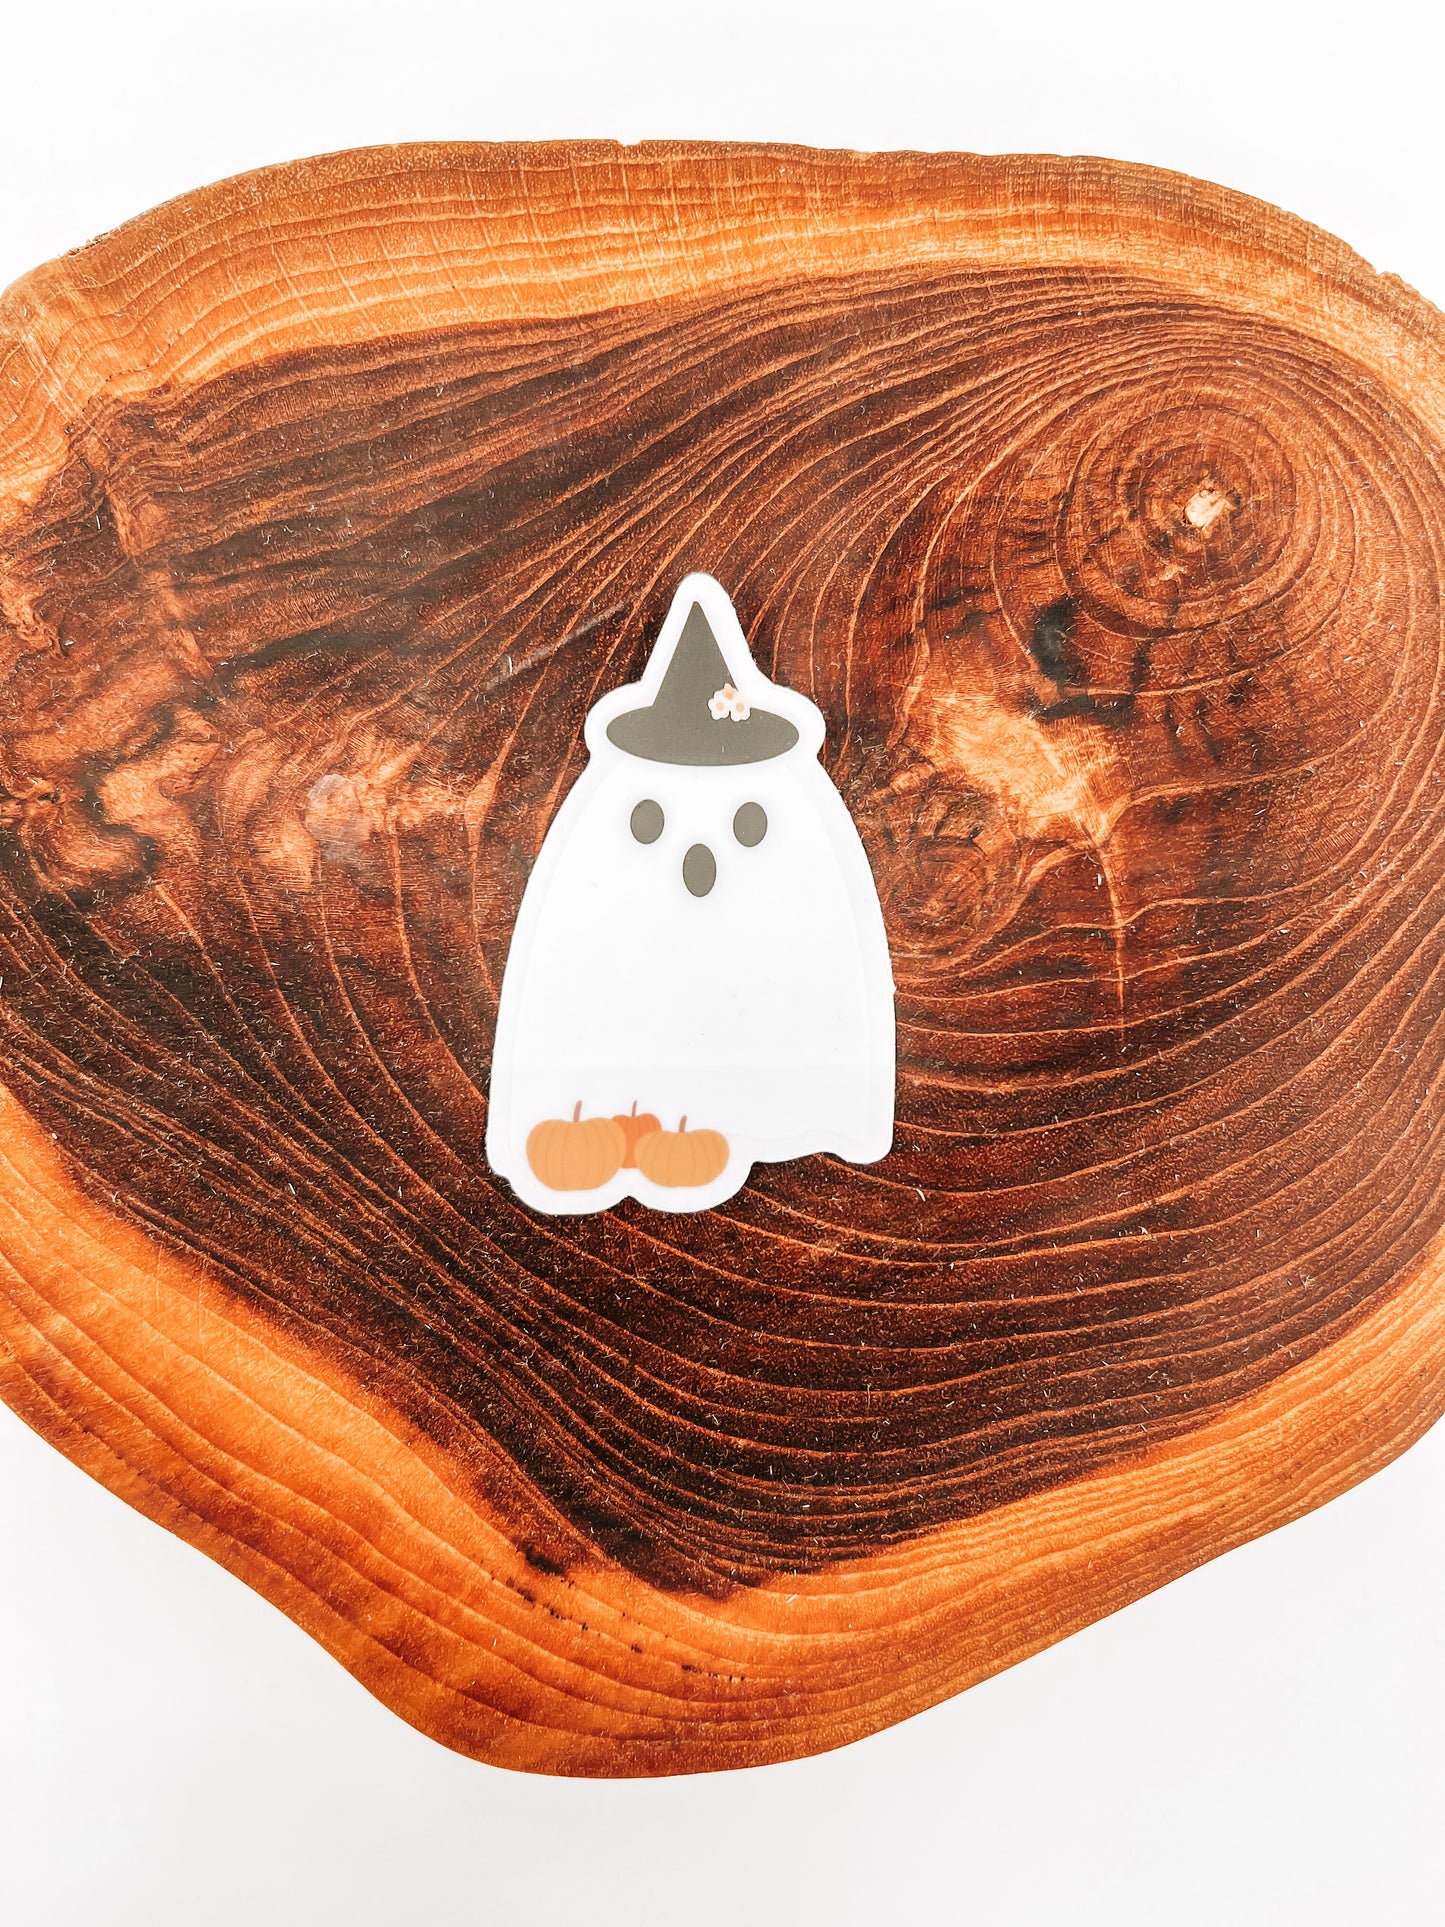 Boo the Witchy Ghost Sticker